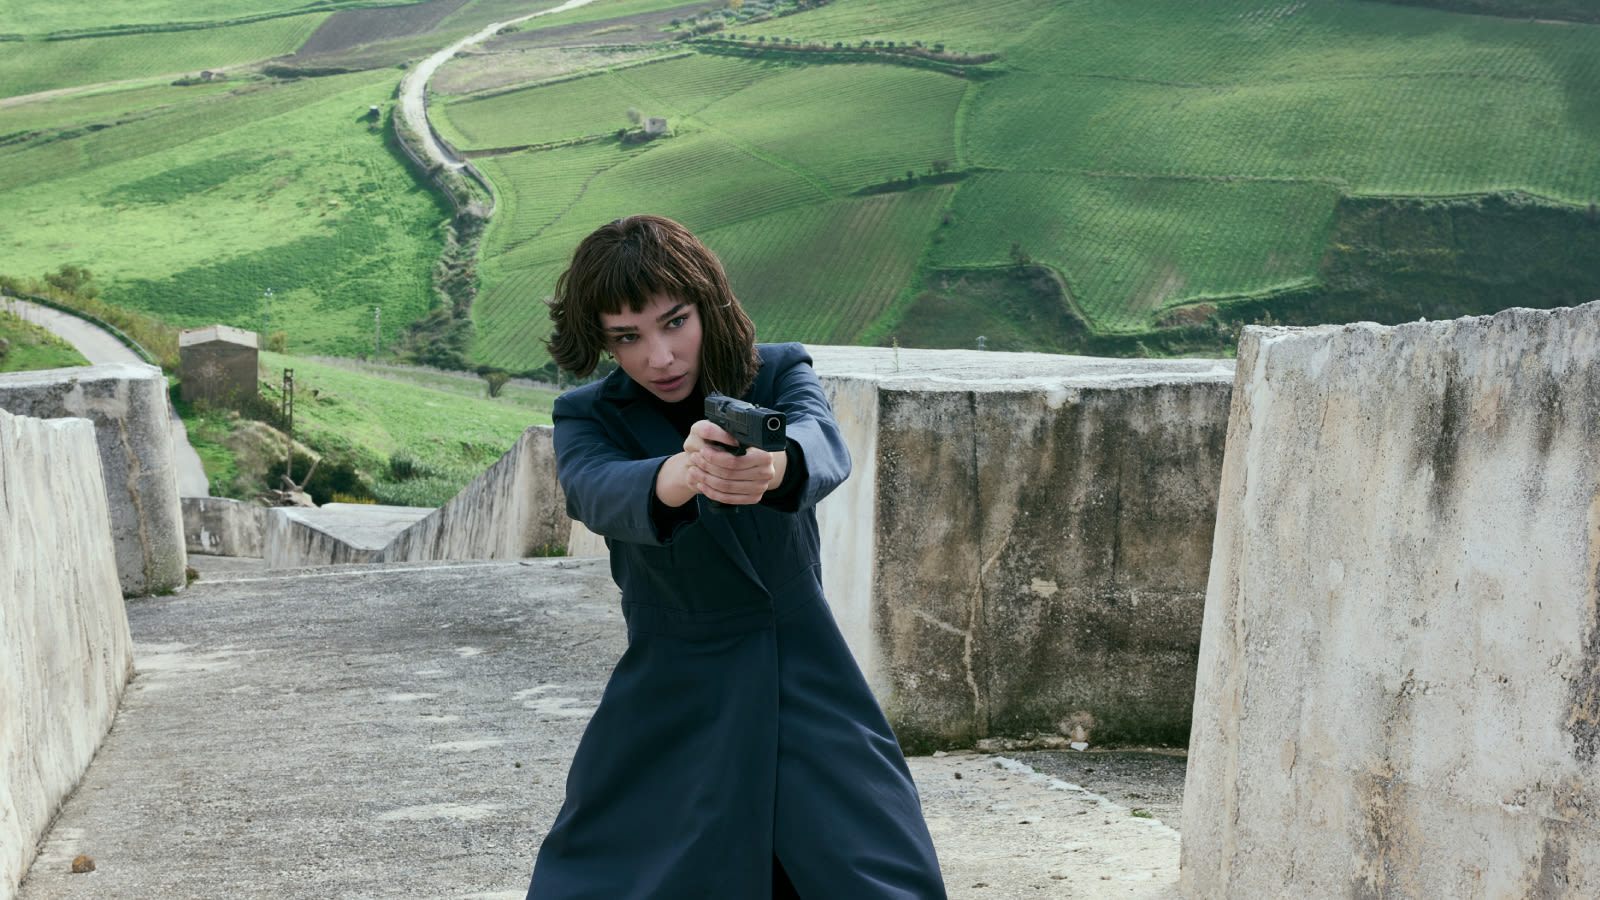 Citadel: Diana — release date, trailer, cast, setting and everything we know about the spy spin-off